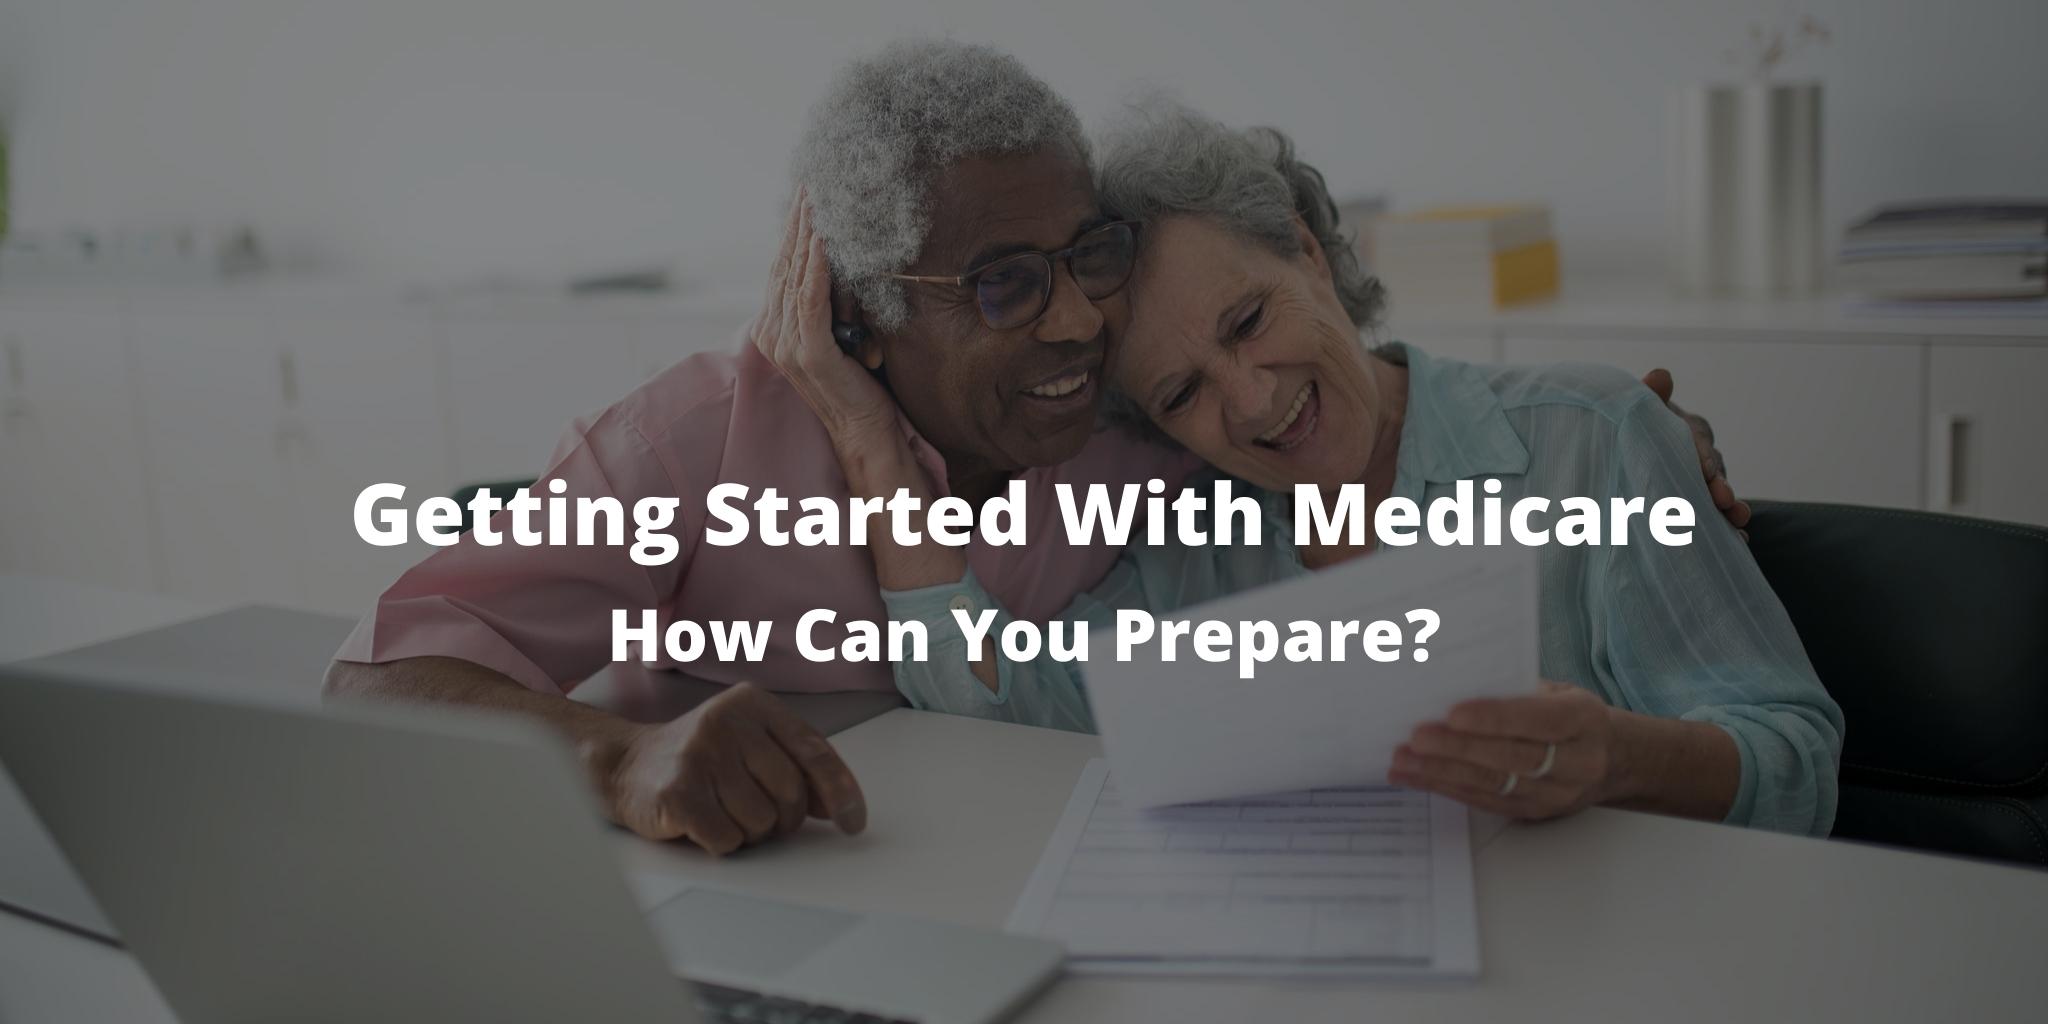 Getting Started With Medicare: How Can You Prepare?